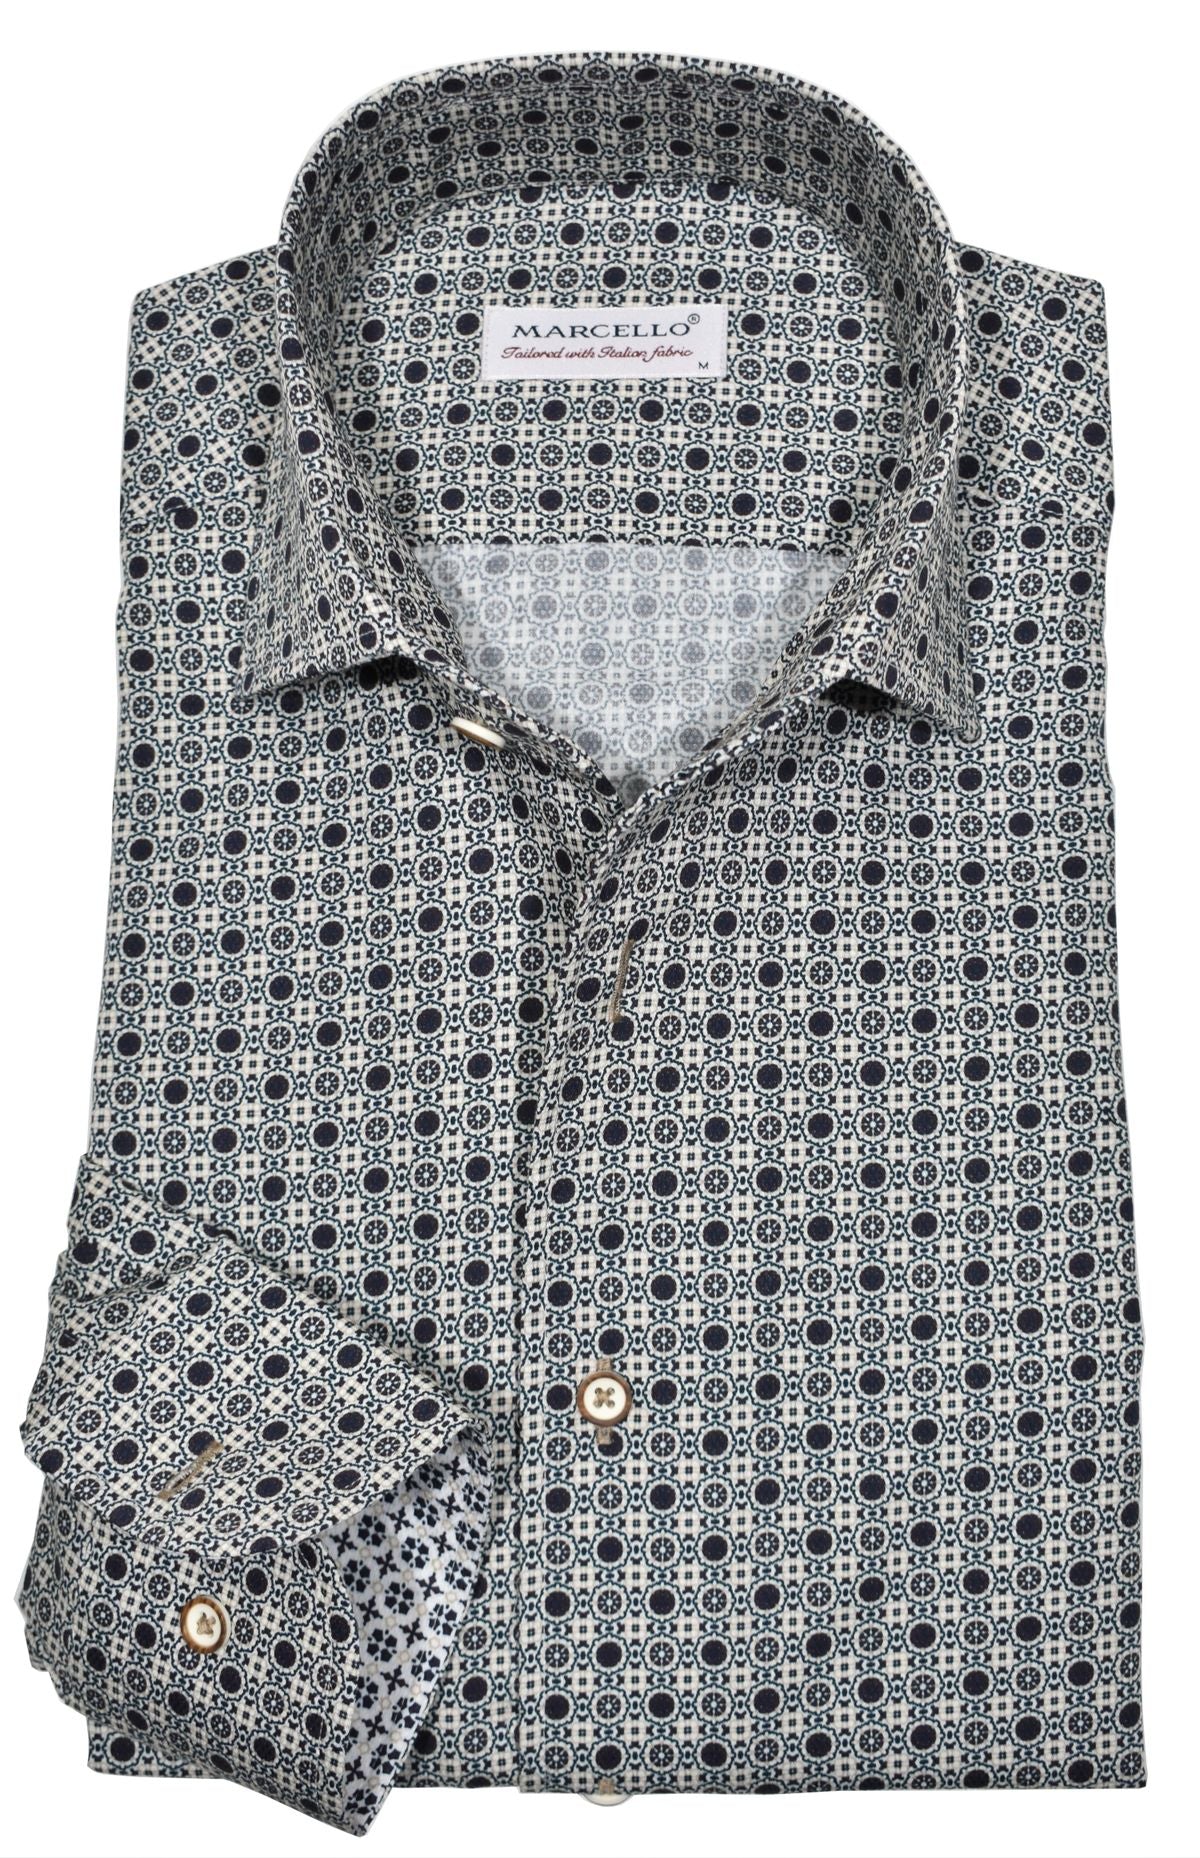 The Marcello exclusive design is like no other, creating a dignified look with a collar that stands perfectly whether worn alone or under a sport coat. Its unique placket ensures a smooth, crisp appearance. Style W845R